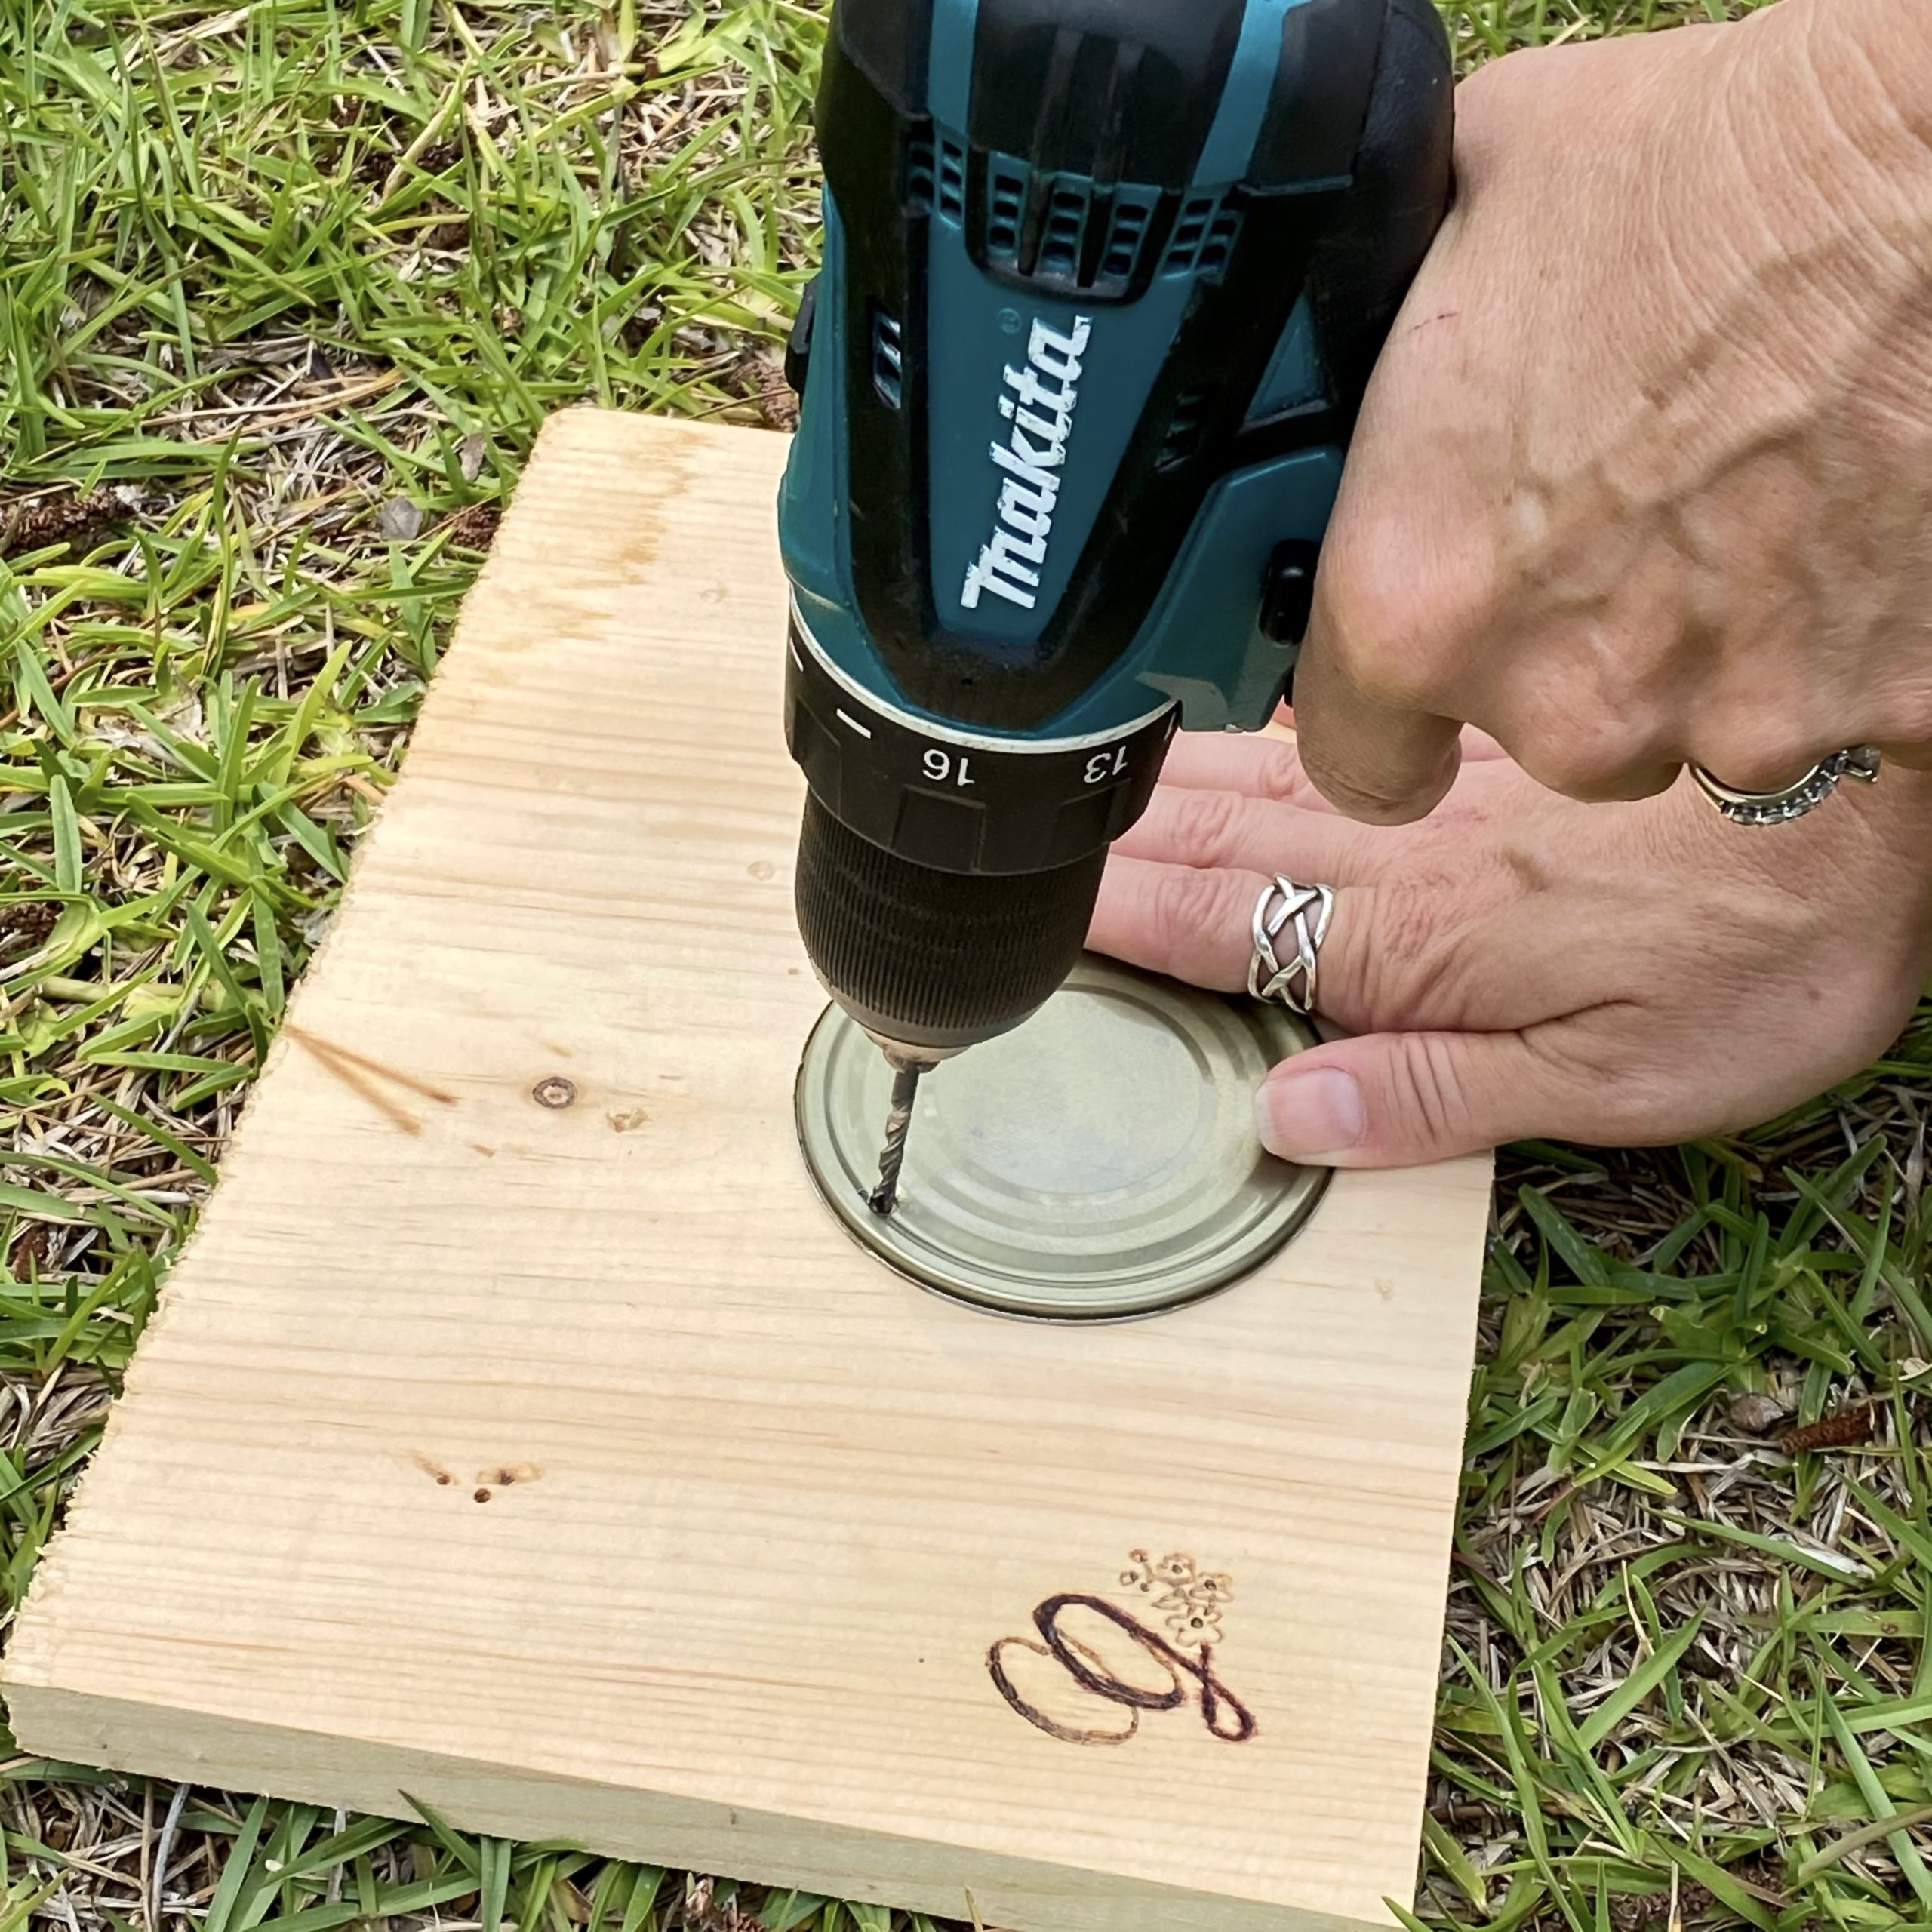 Drilling a hole in the tin can top to make a DIY garden marker.